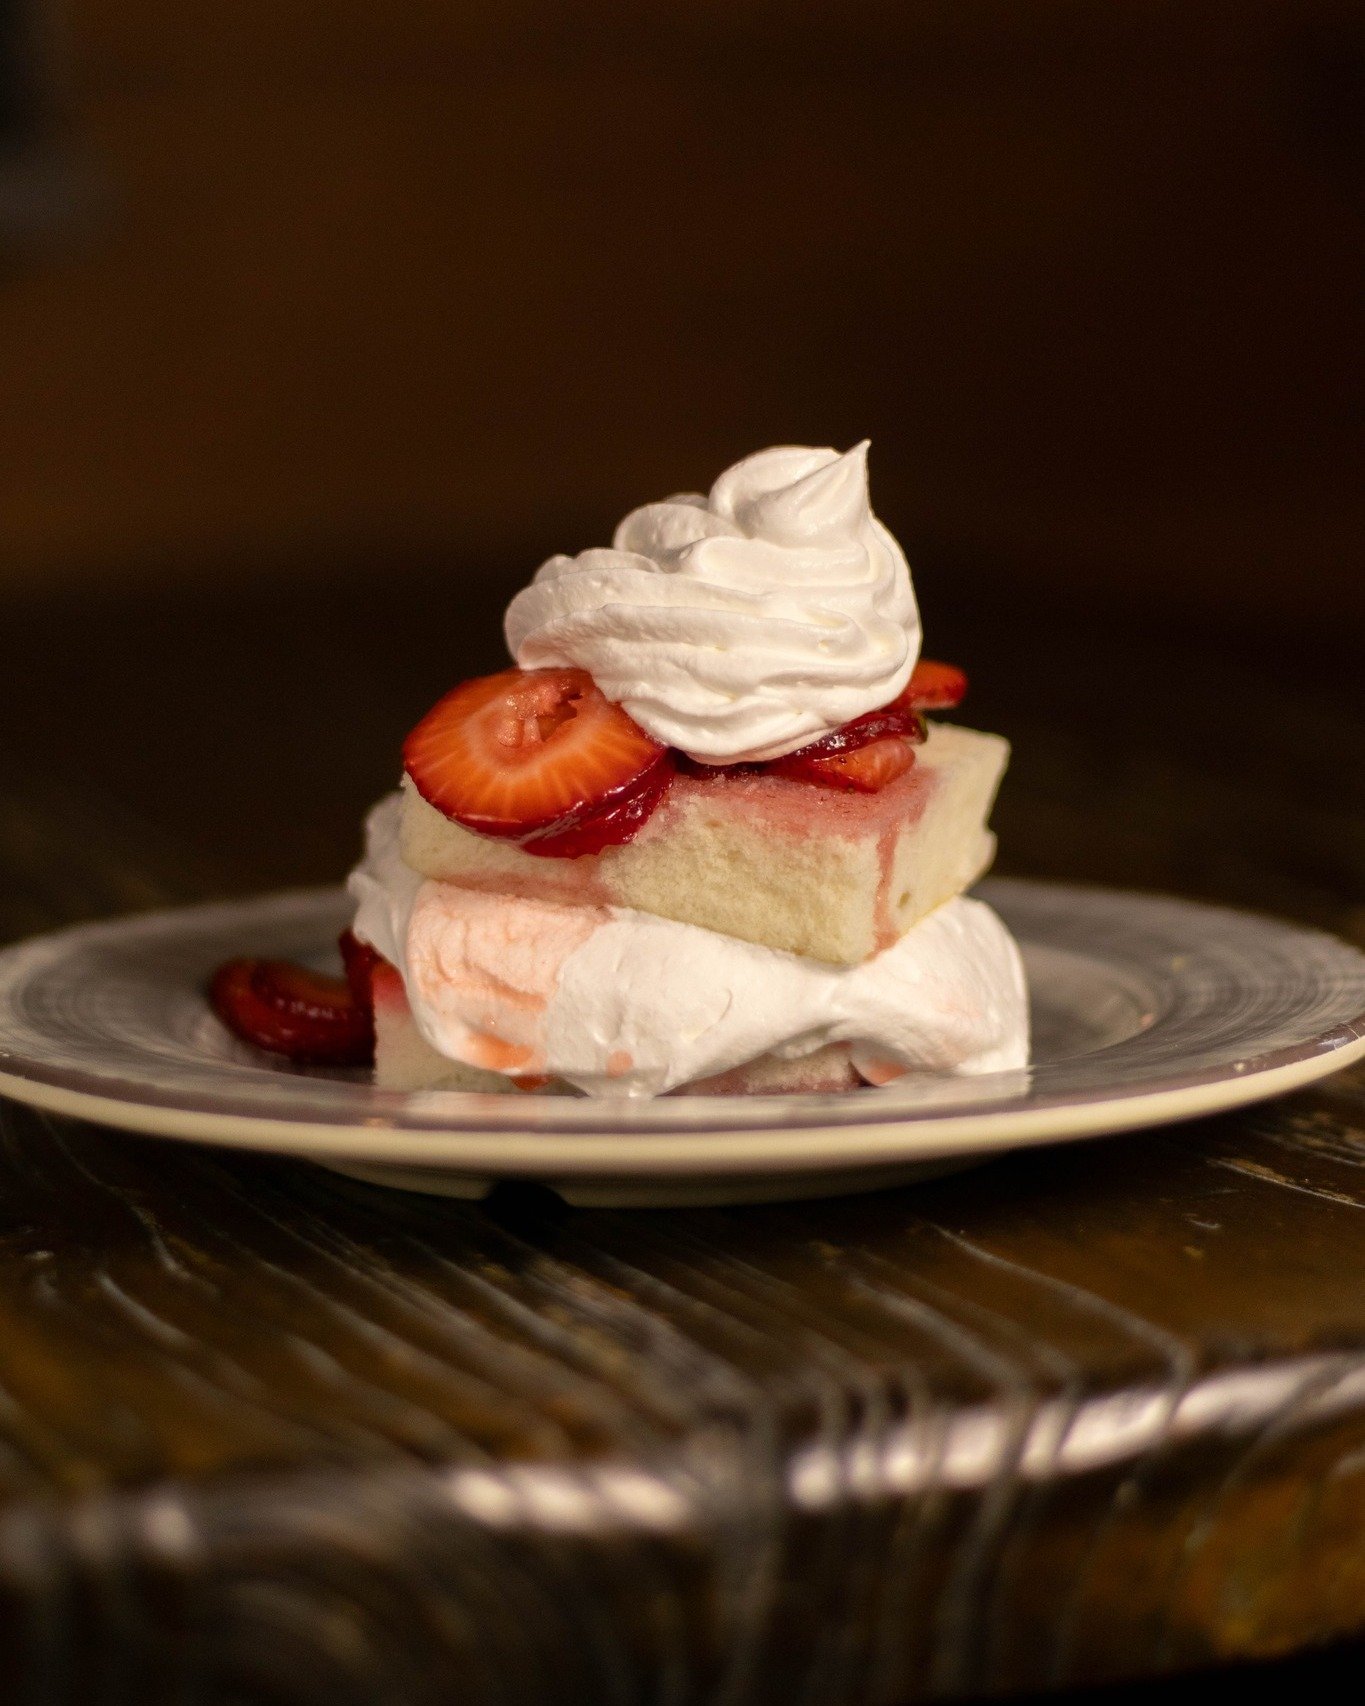 Save room for this stack of sweetness 🍓 Our new dessert is a fluffy white cake soaked in strawberry jello, served with whipped cream &amp; strawberries.